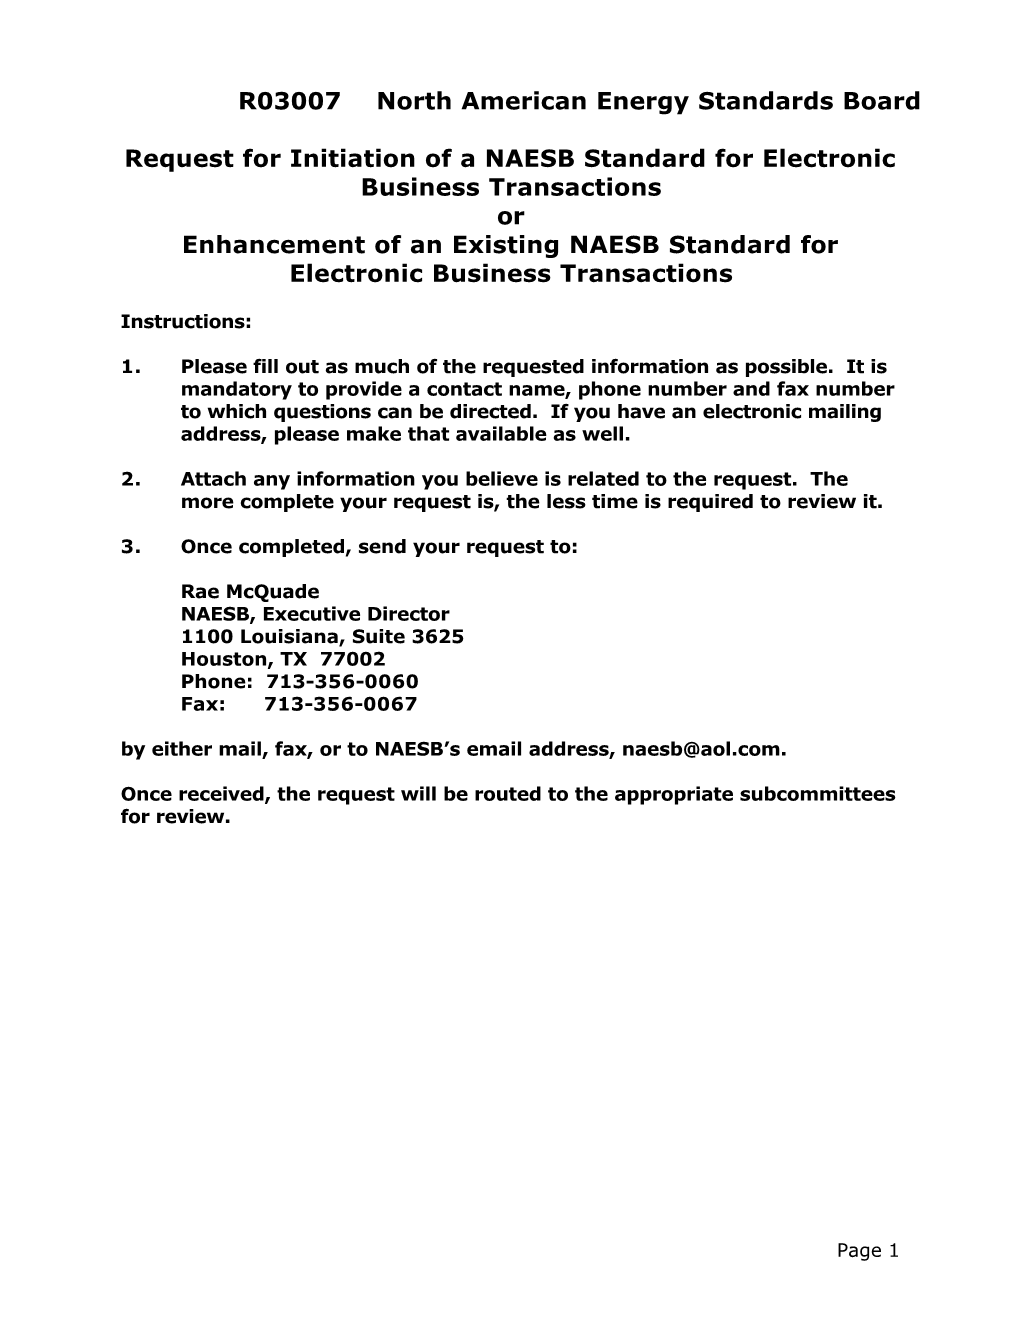 R03007 North American Energy Standards Board Request for Initiation of a NAESB Standard for Electronic Business Transactions